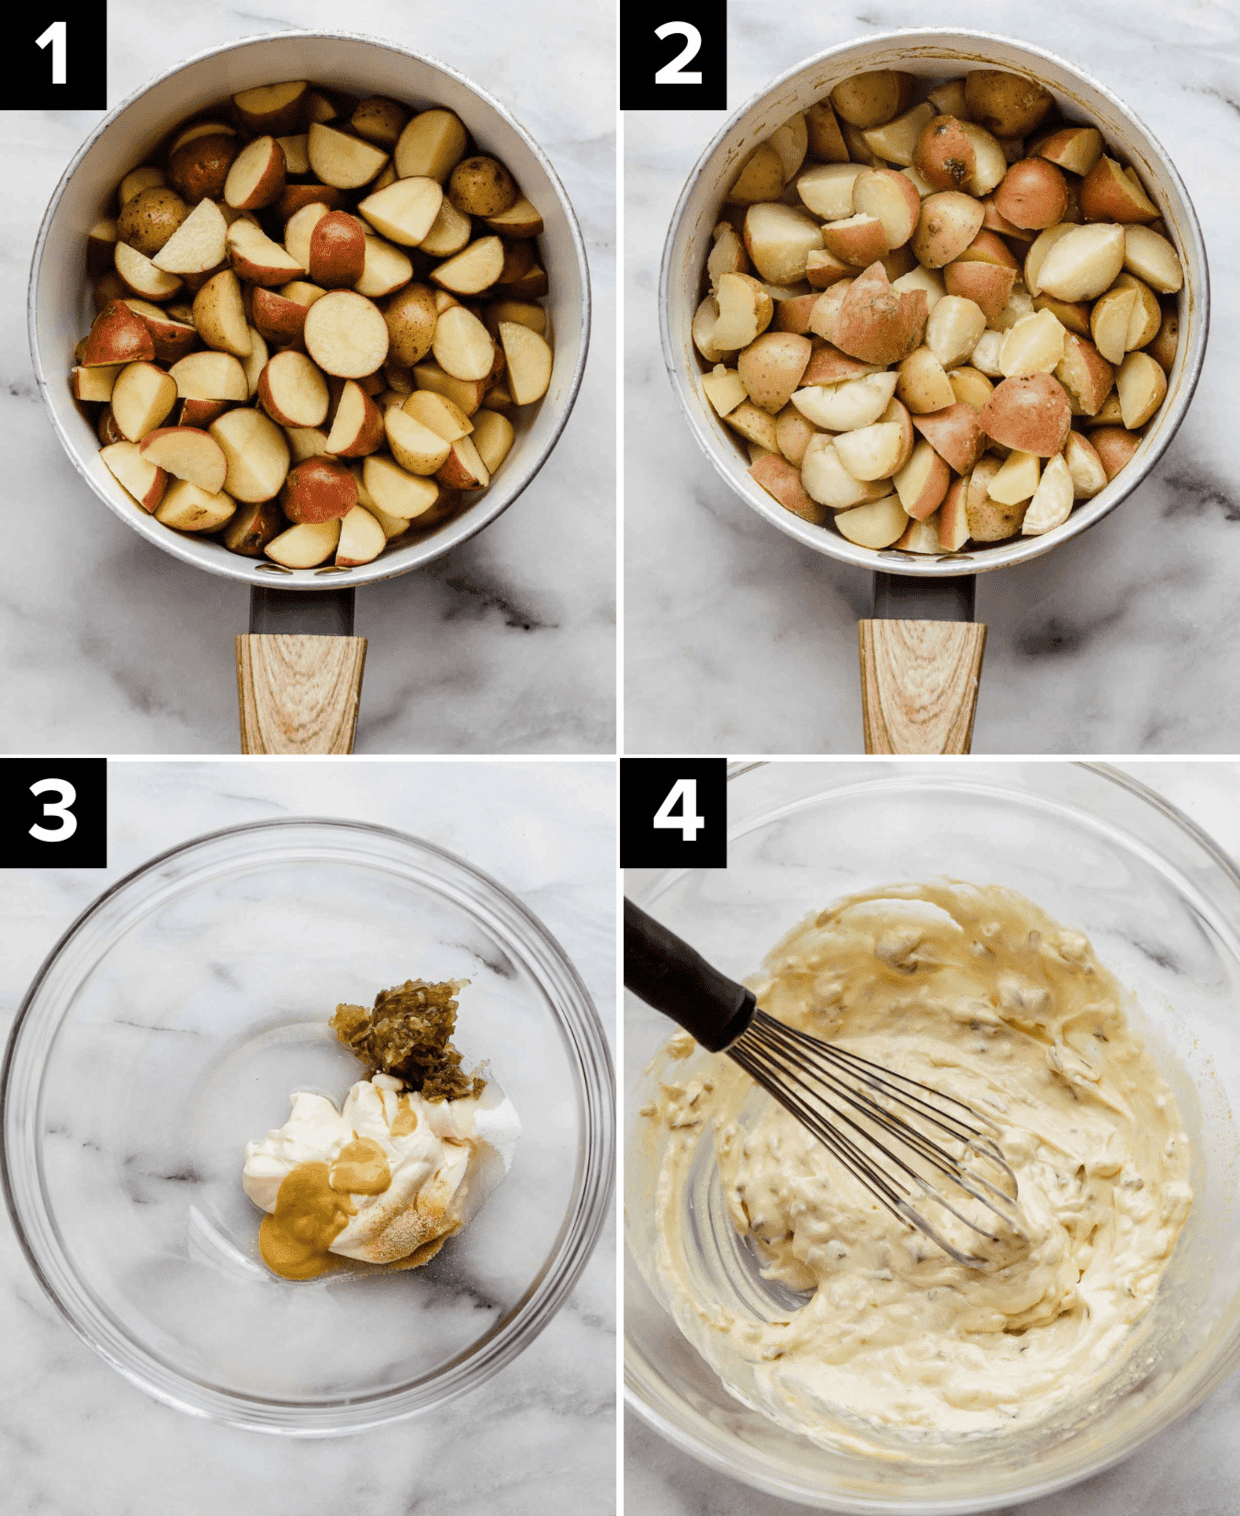 Four images top left and right is baby potatoes in saucepan, bottom left glass bowl with mayo, relish, mustard, bottom right is a whisk mixing potato salad dressing.